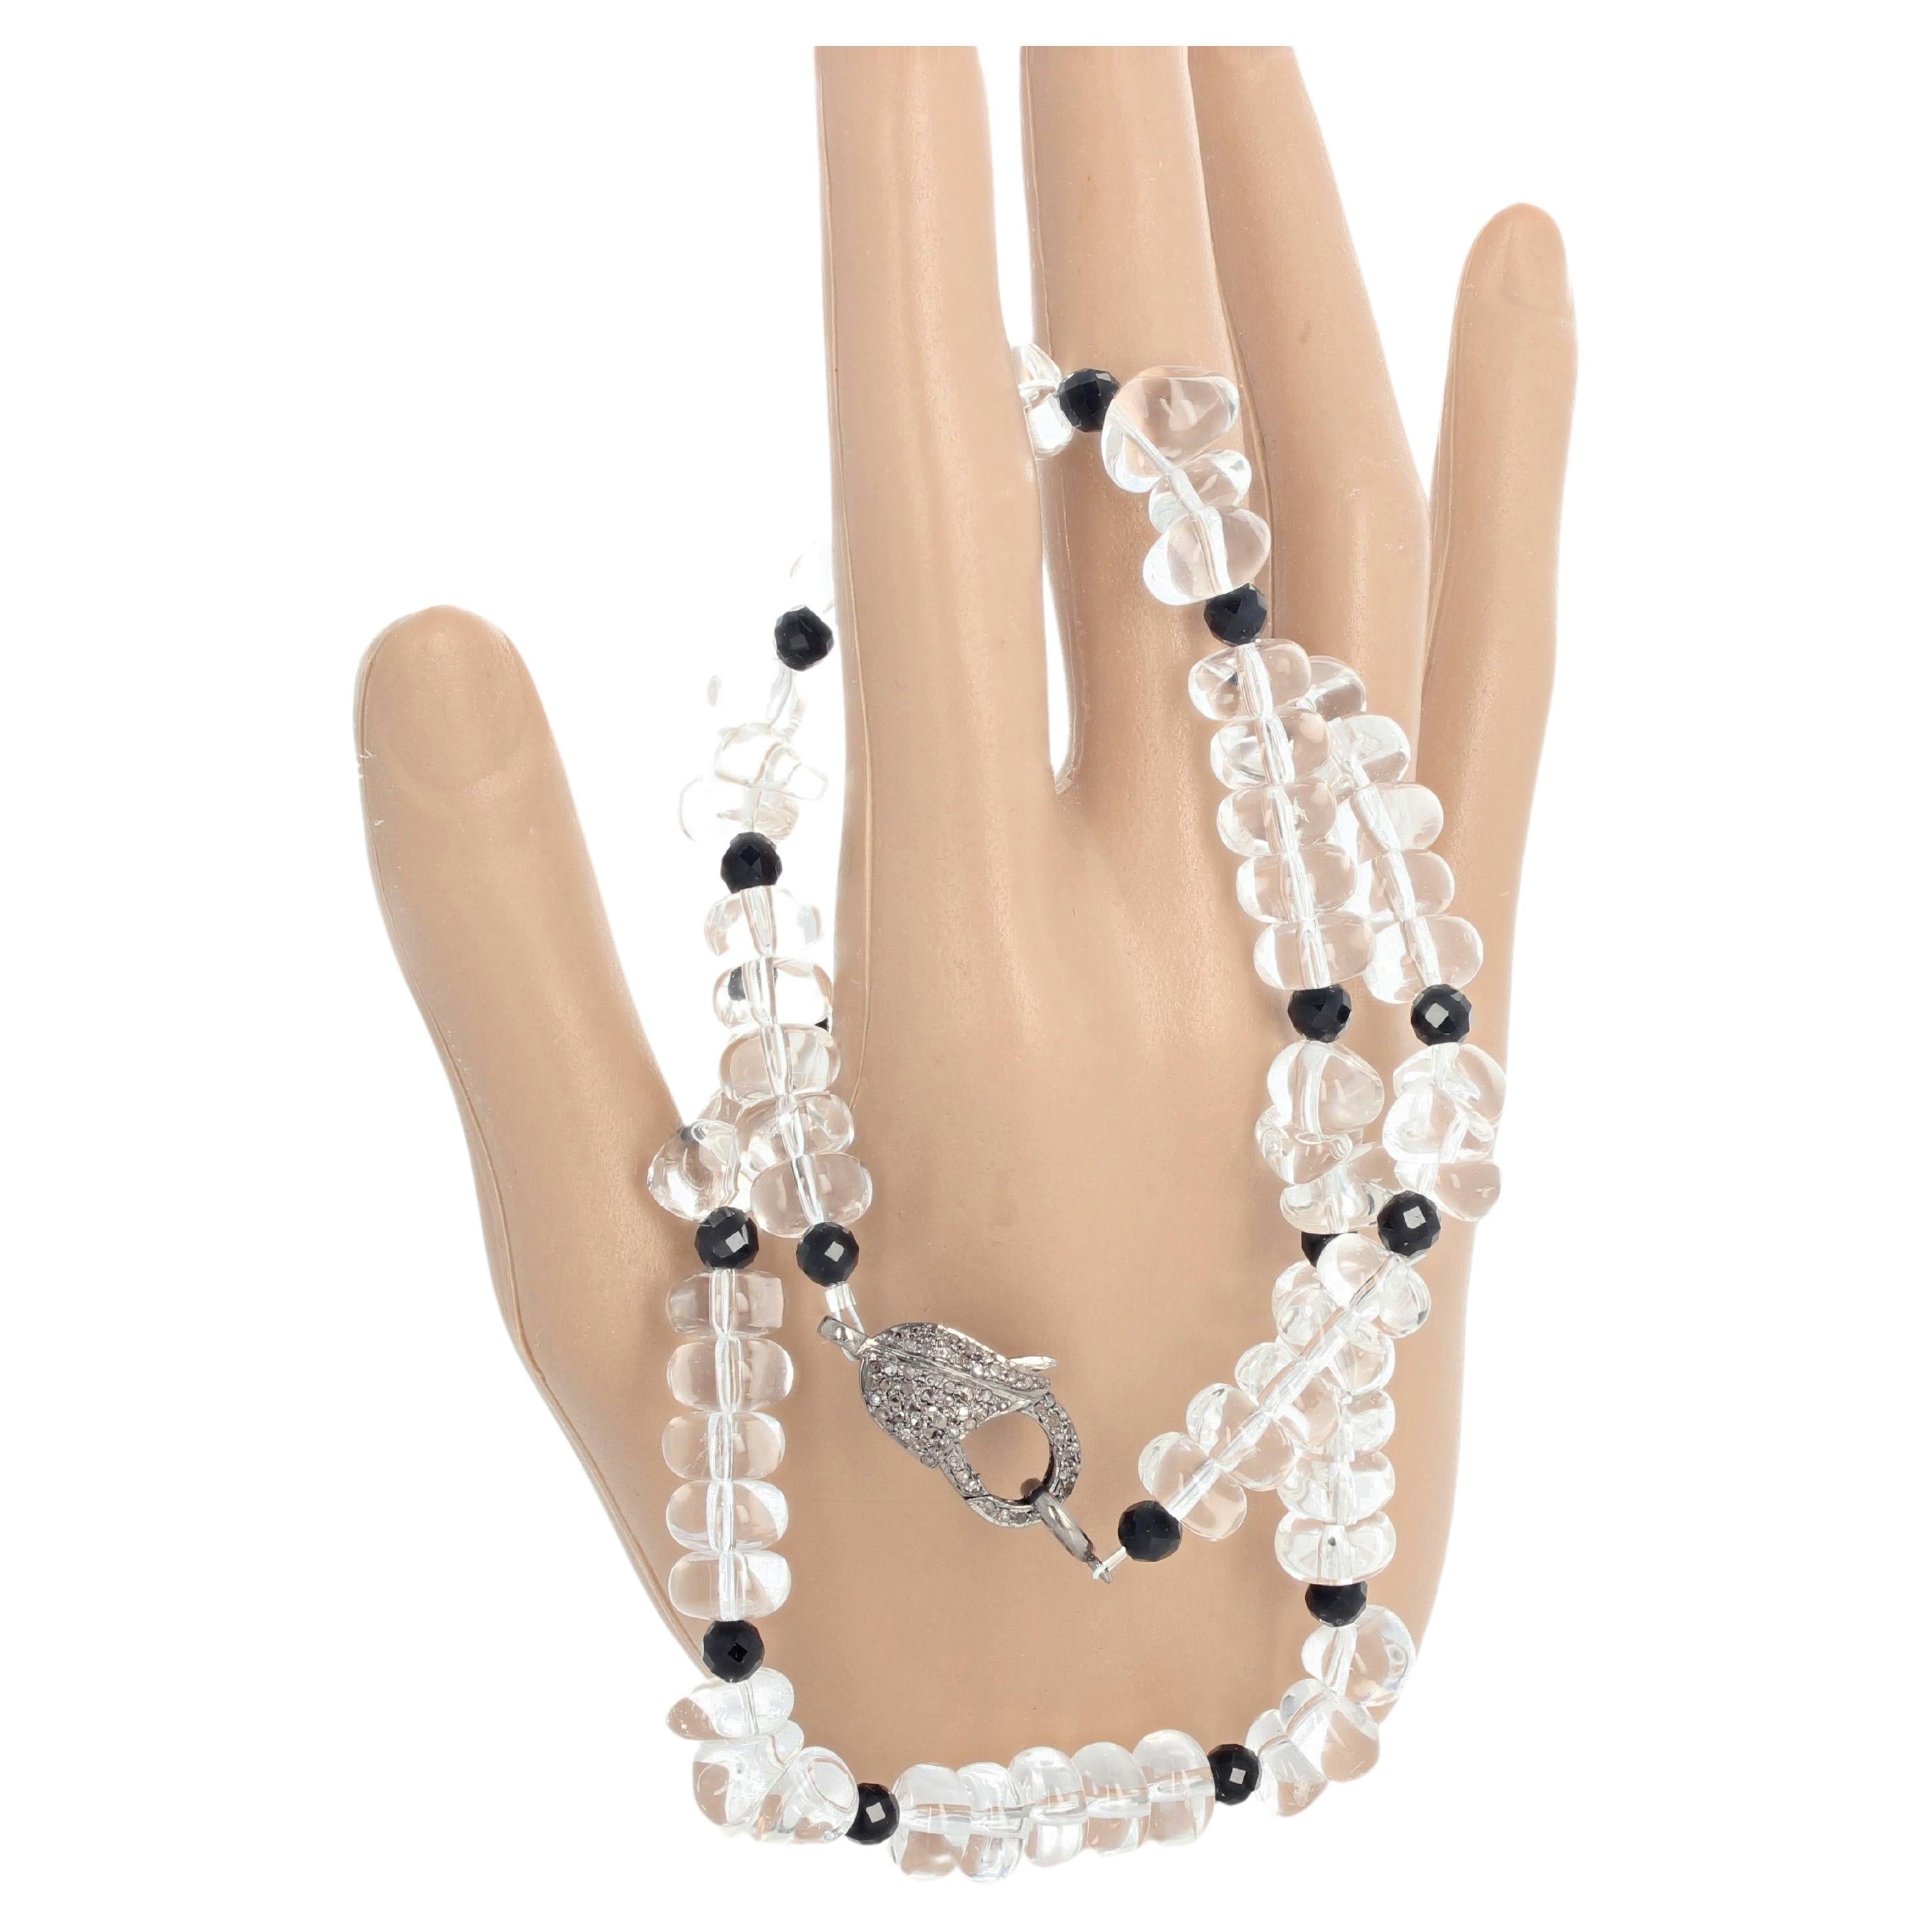 Sparkling translucent beautiful clear natural Quartz adorned with sparkling gem cut Spinel accents set in a necklace 17 inches long with a darkened sterling silver diamond encrusted clasp.  The tiny little diamonds in the clasp sparkle nicely so